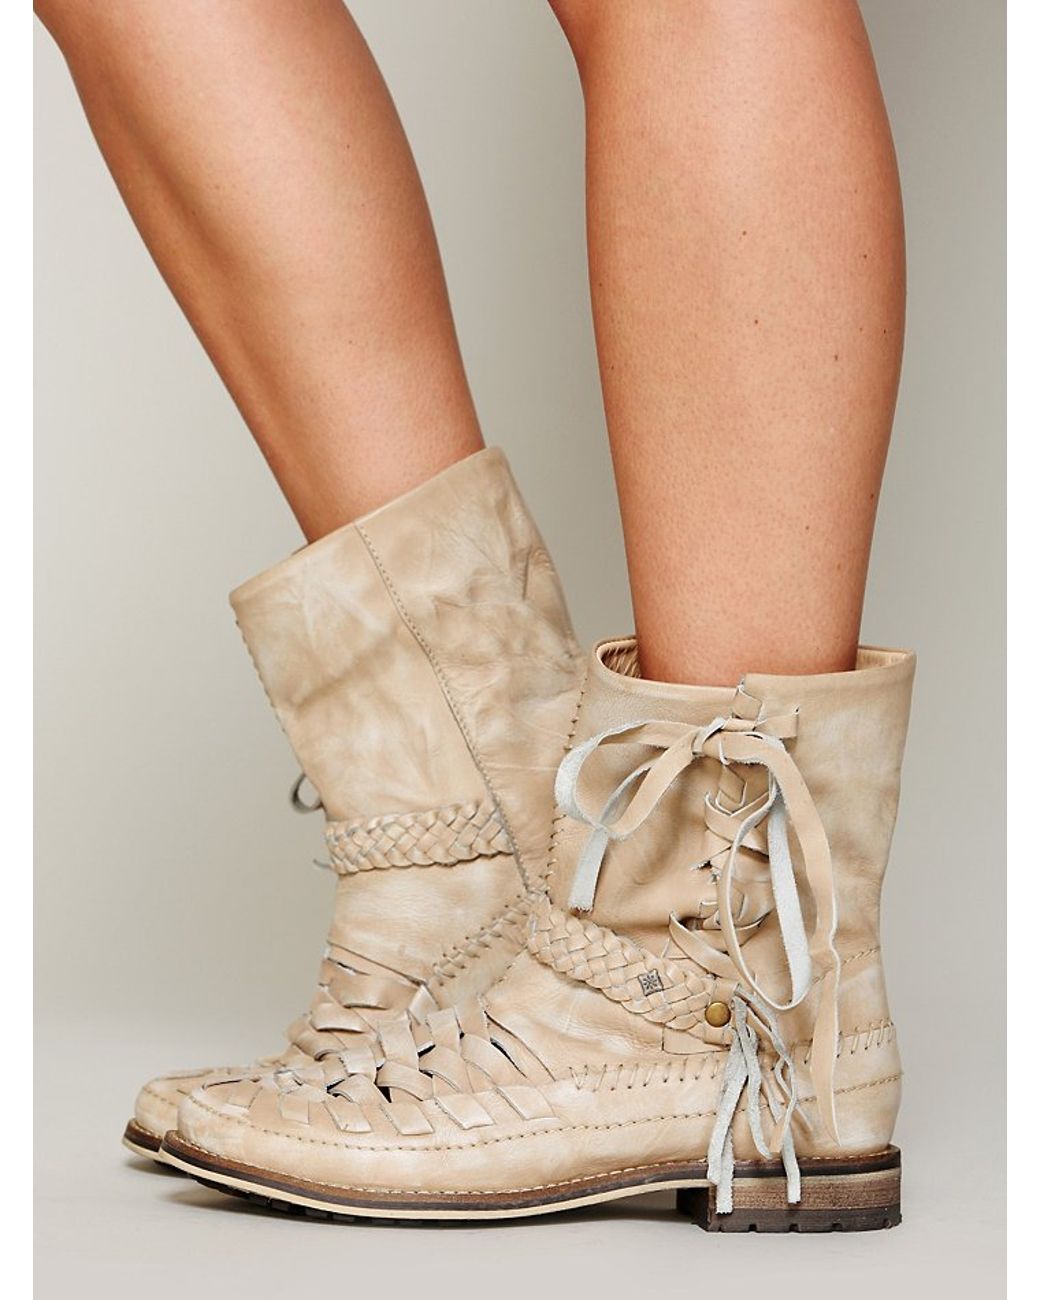 Free People Chateau Moccasin Boot in White